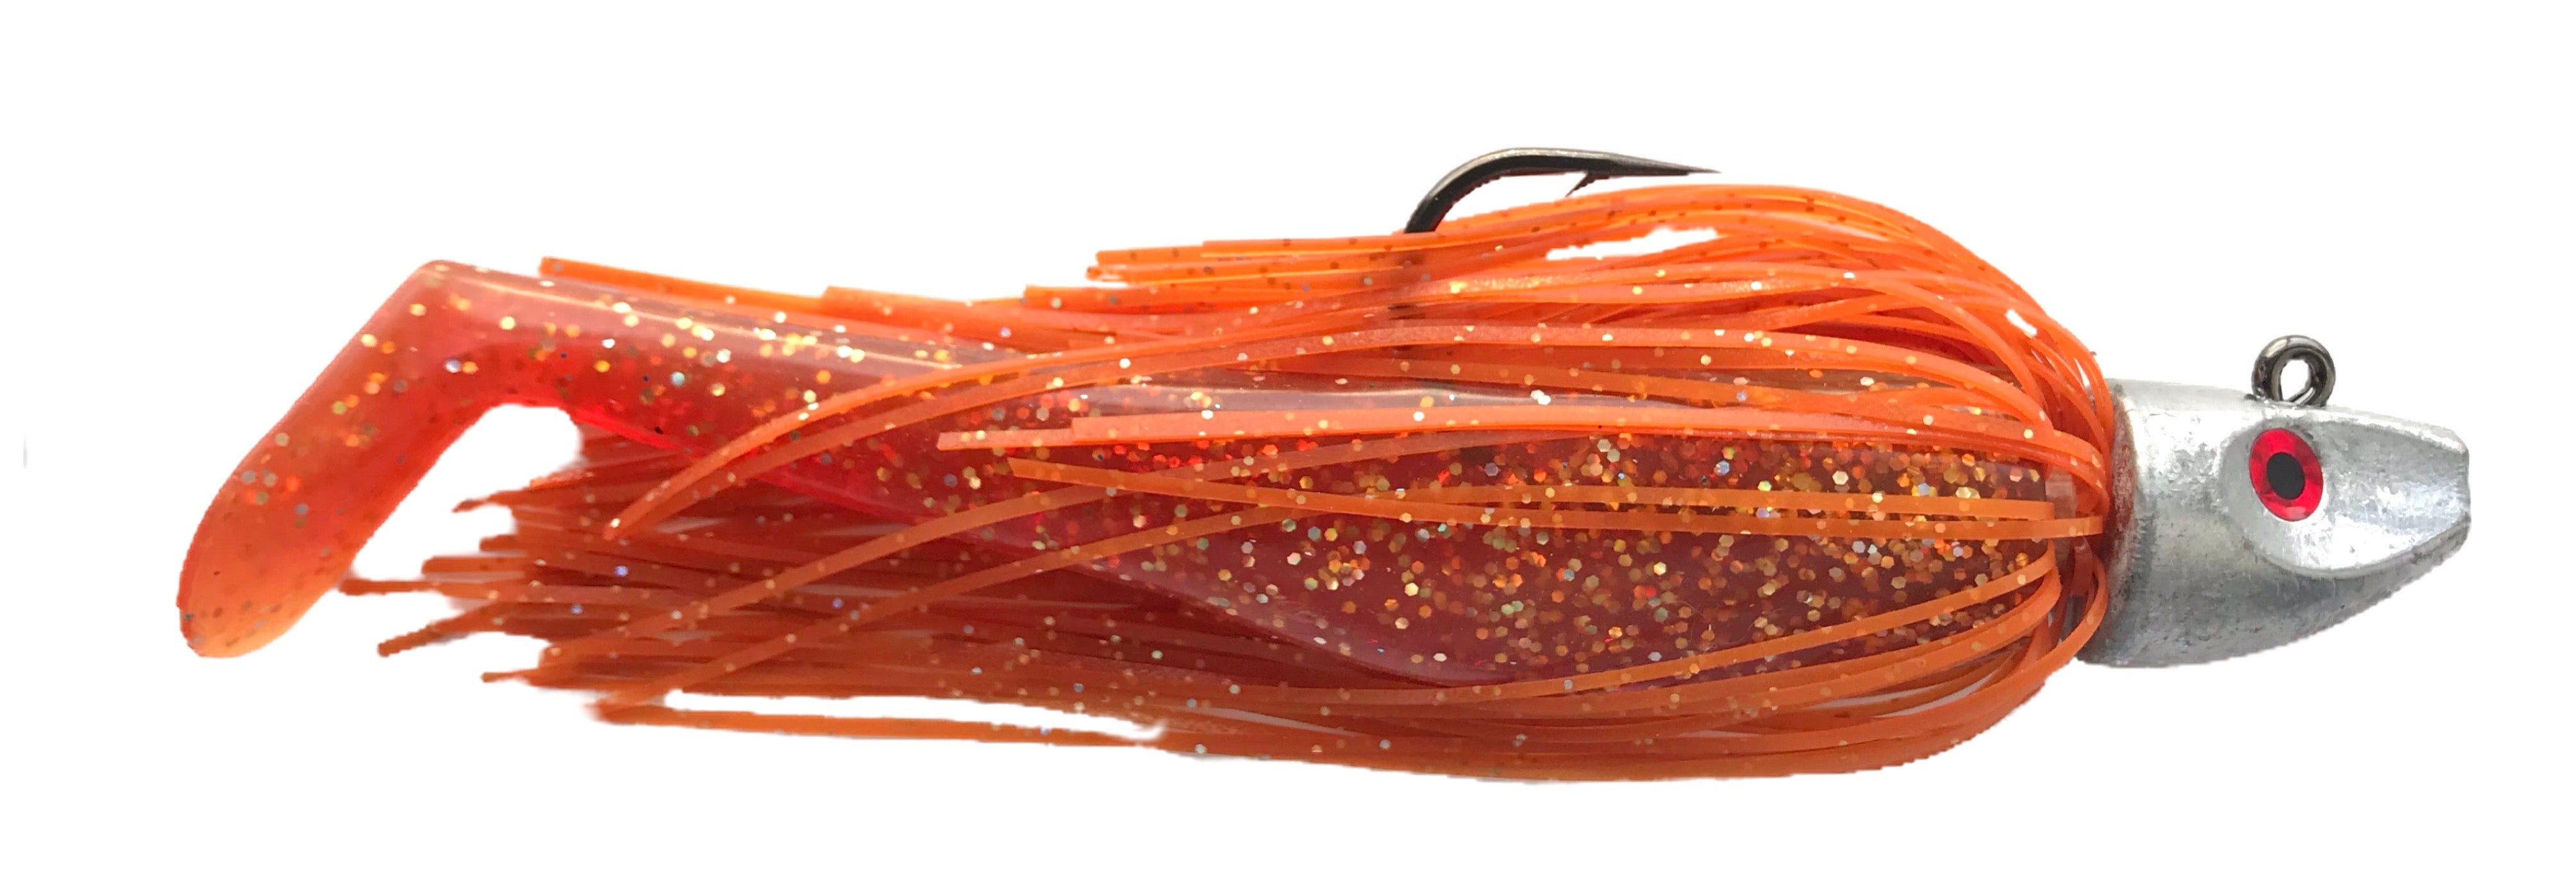 6 Skirted Whip-it fish : Rigged – Al Gags Fishing Lures